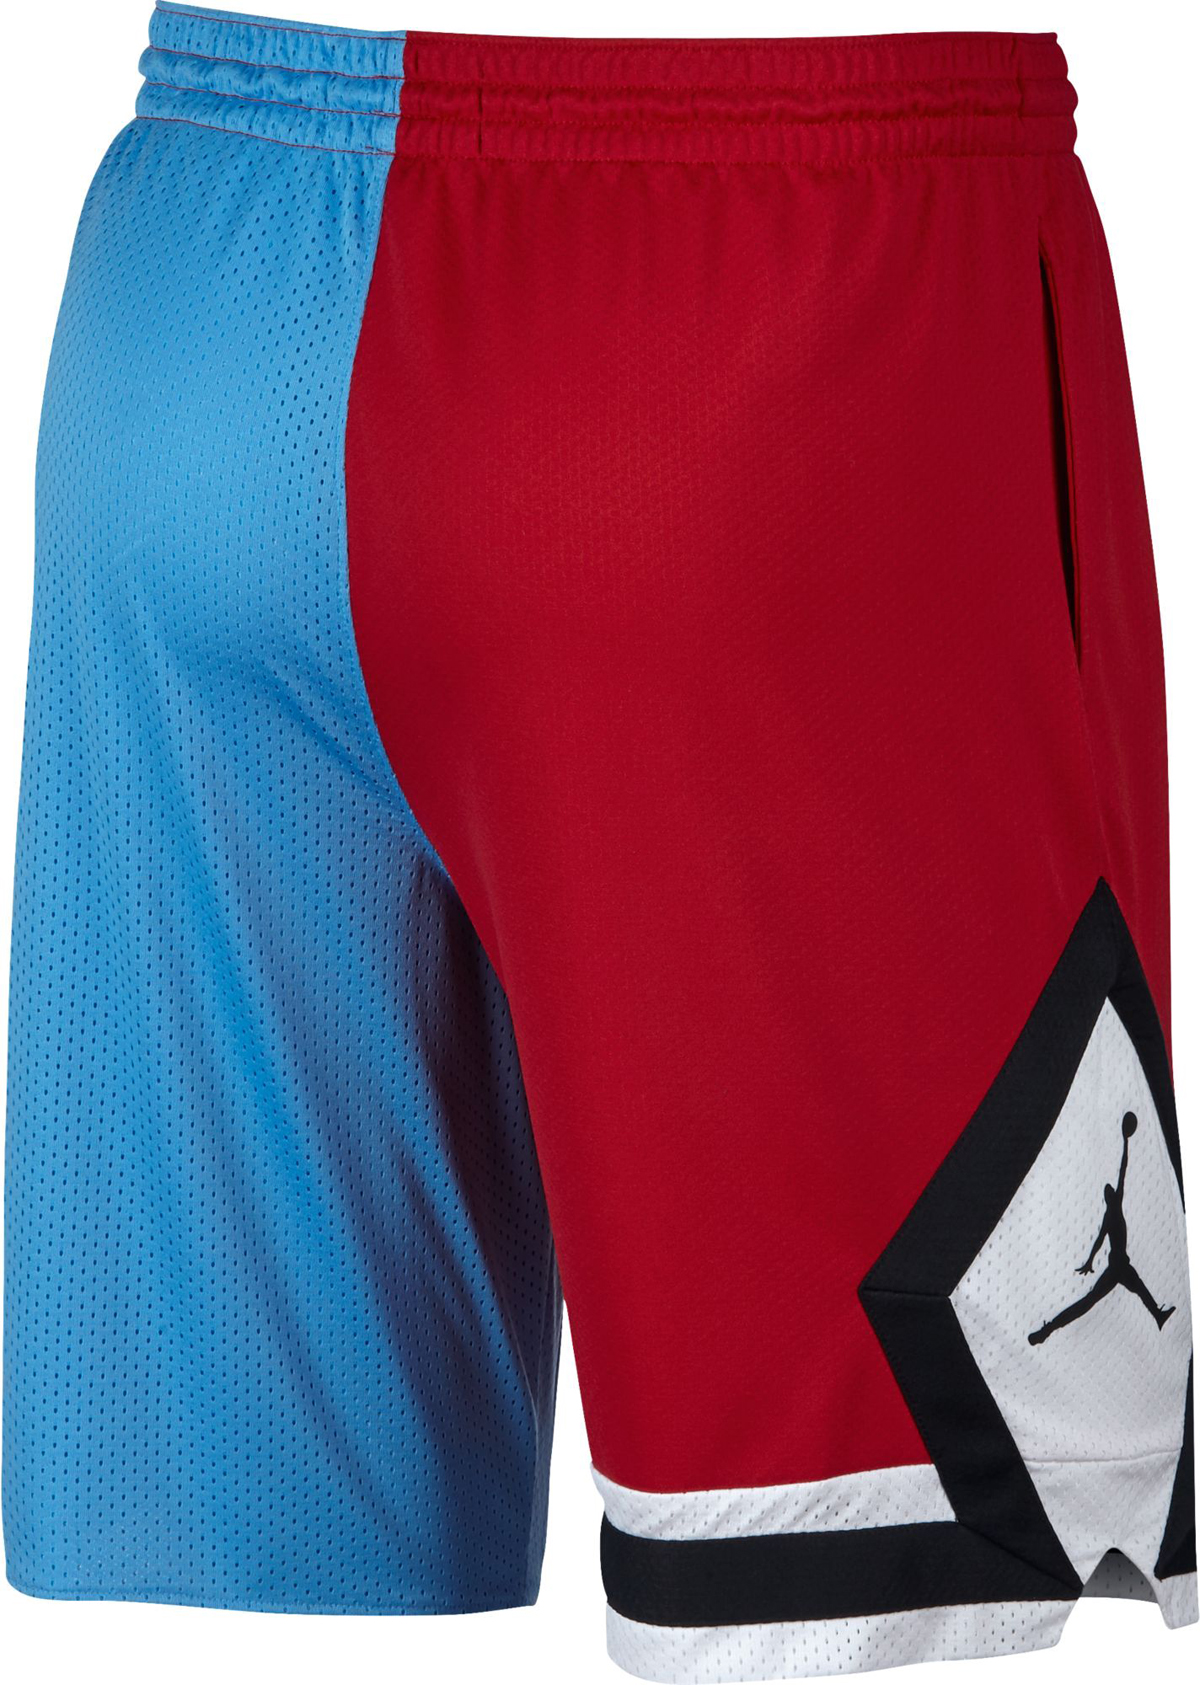 Jordan DNA Shorts Pay Tribute to MJ's Days as a Tar Heel and Chicago ...